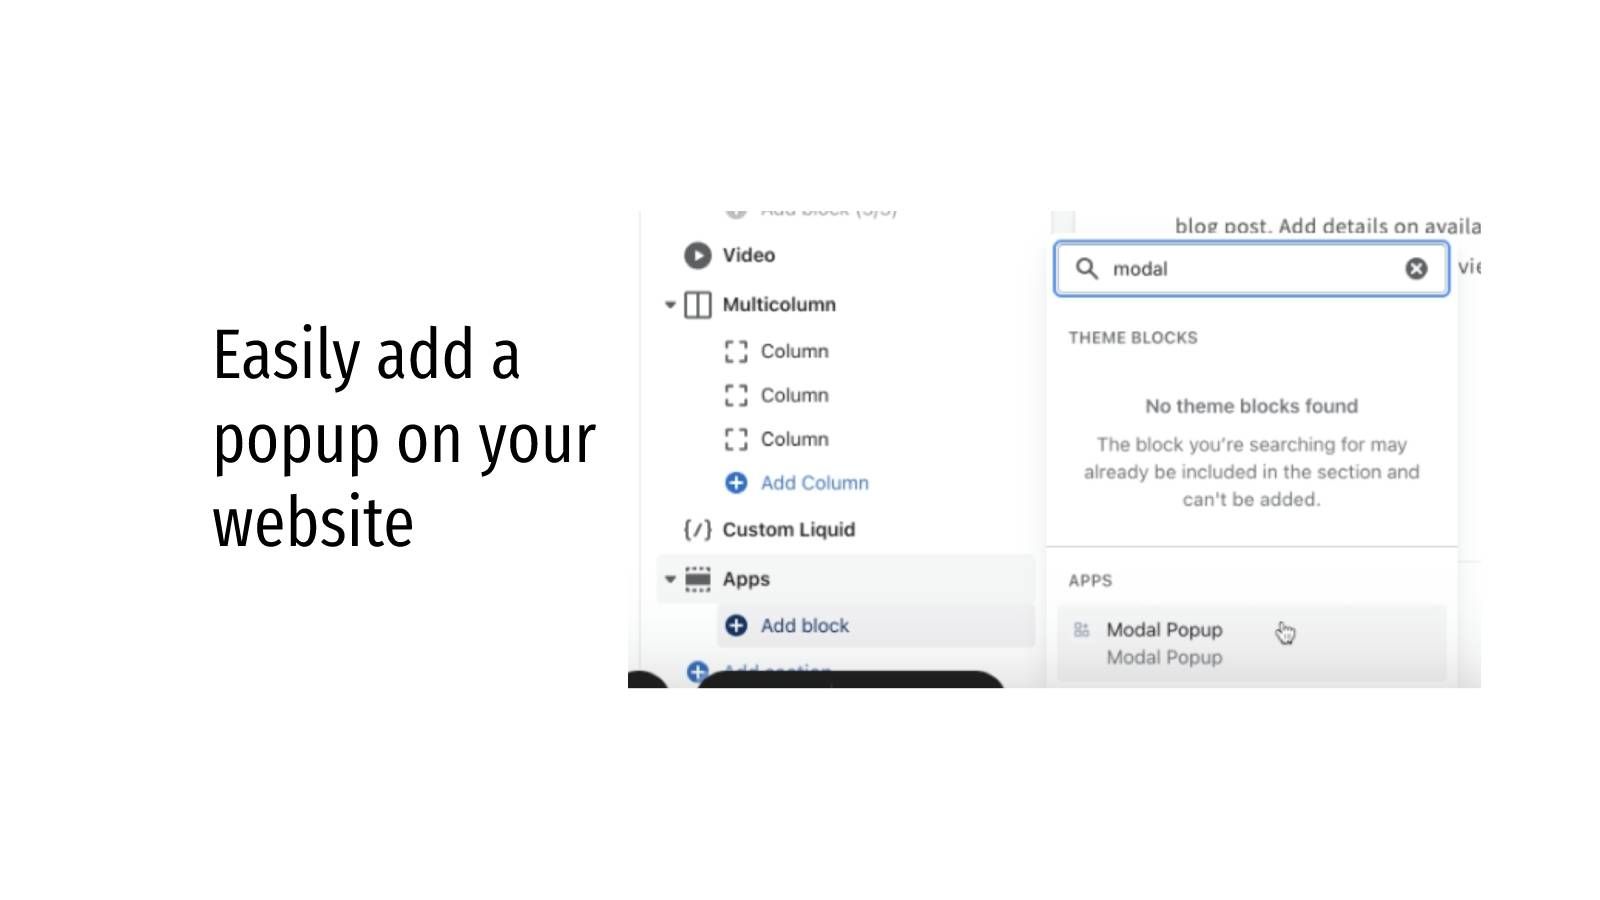 Easily add a popup on your website.